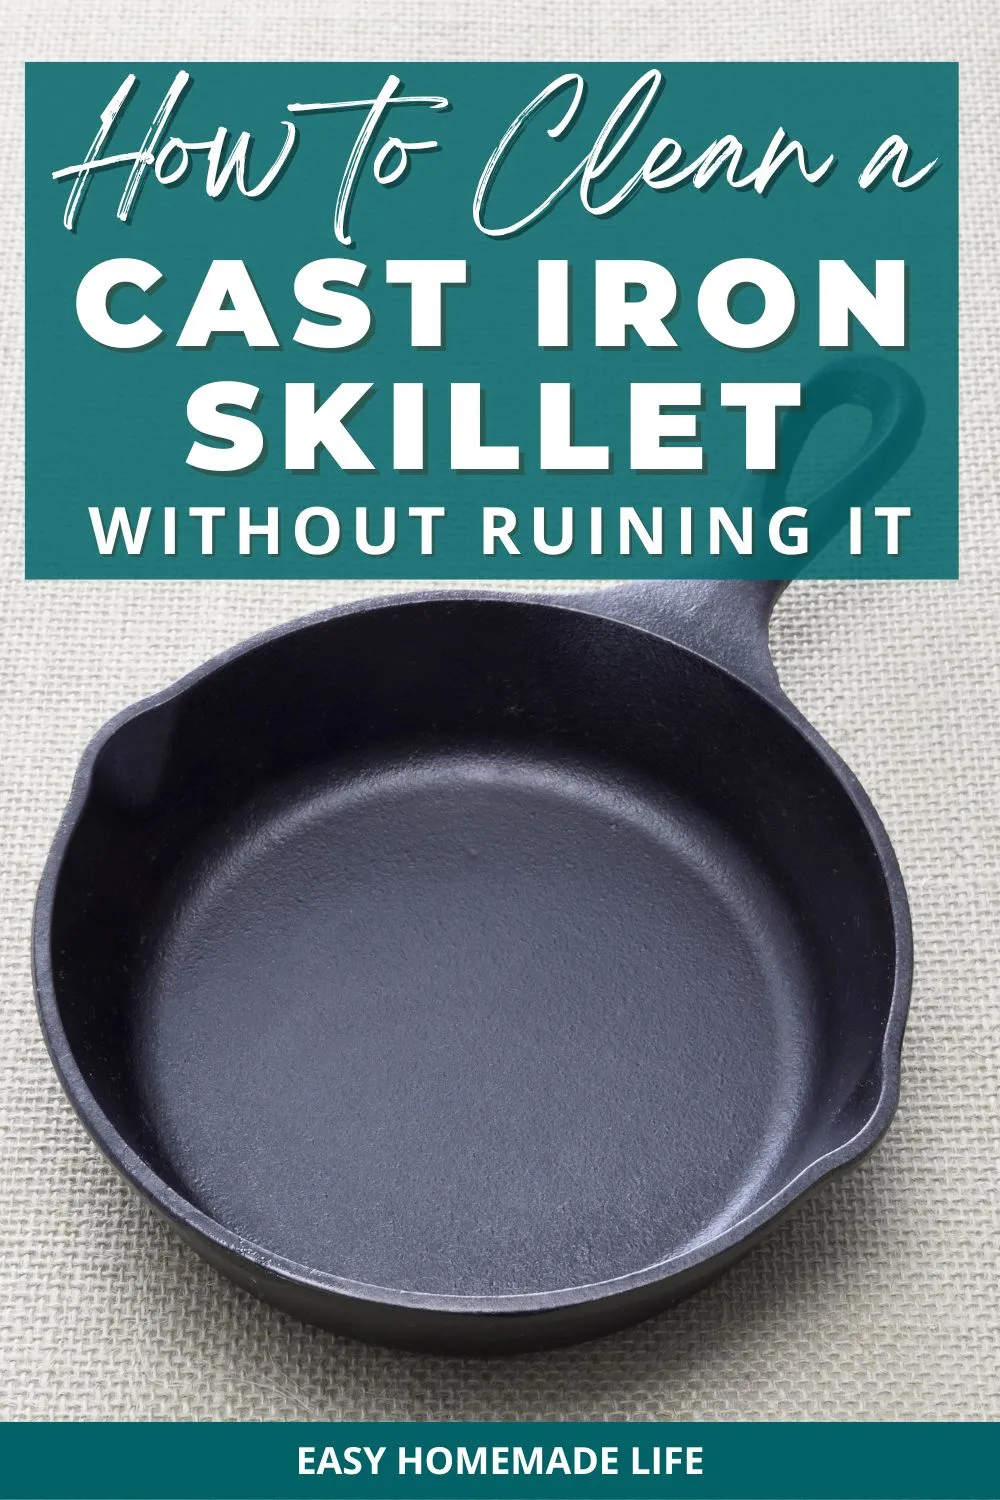 https://www.easyhomemadelife.com/wp-content/uploads/2023/05/how-to-clean-a-cast-iron-skillet-PIN.jpg.webp